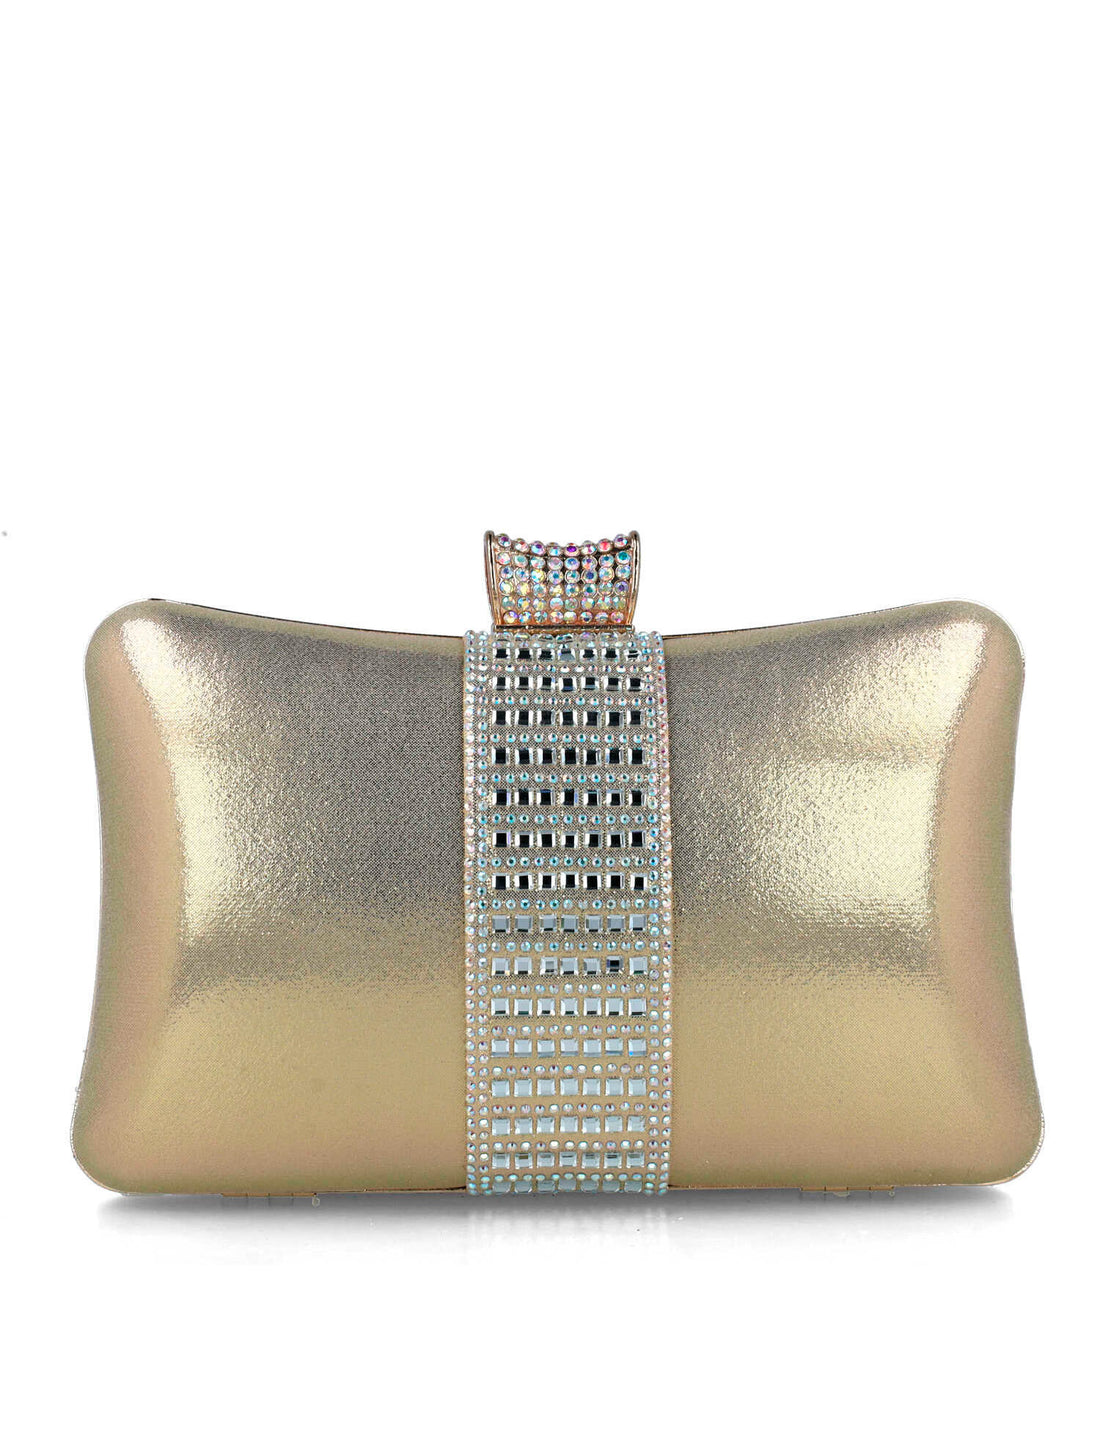 Gold Clutch With Embellishment_85498_00_01